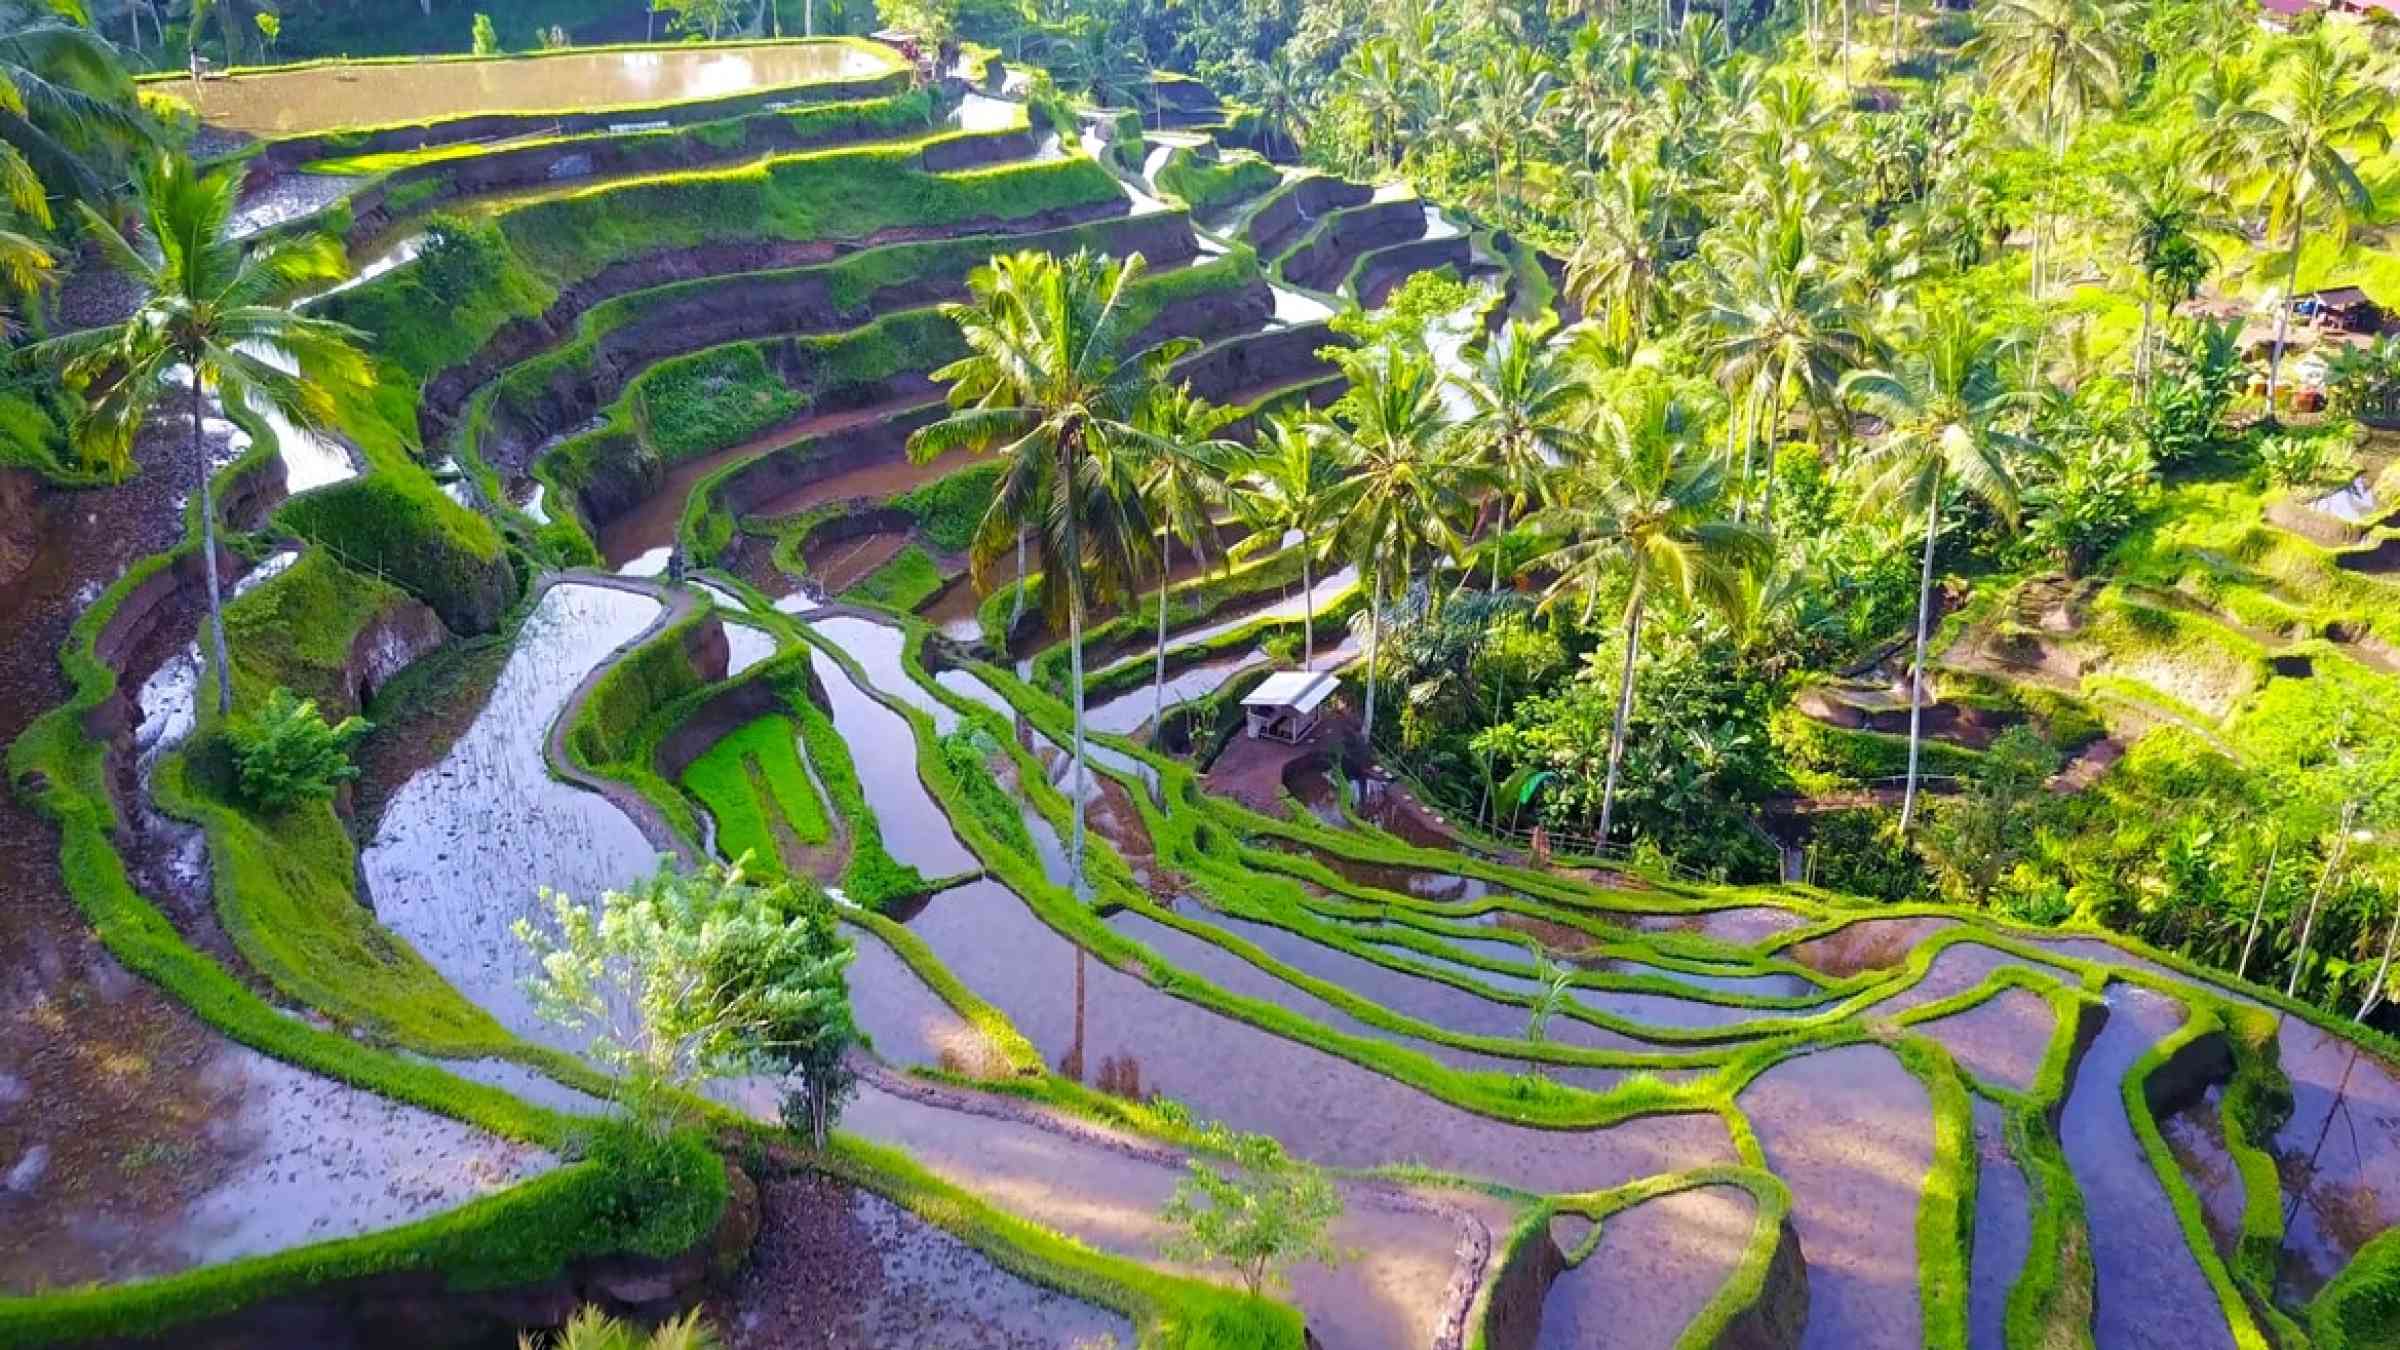 Areal view of rice terraces in the jungle in Indonesia.